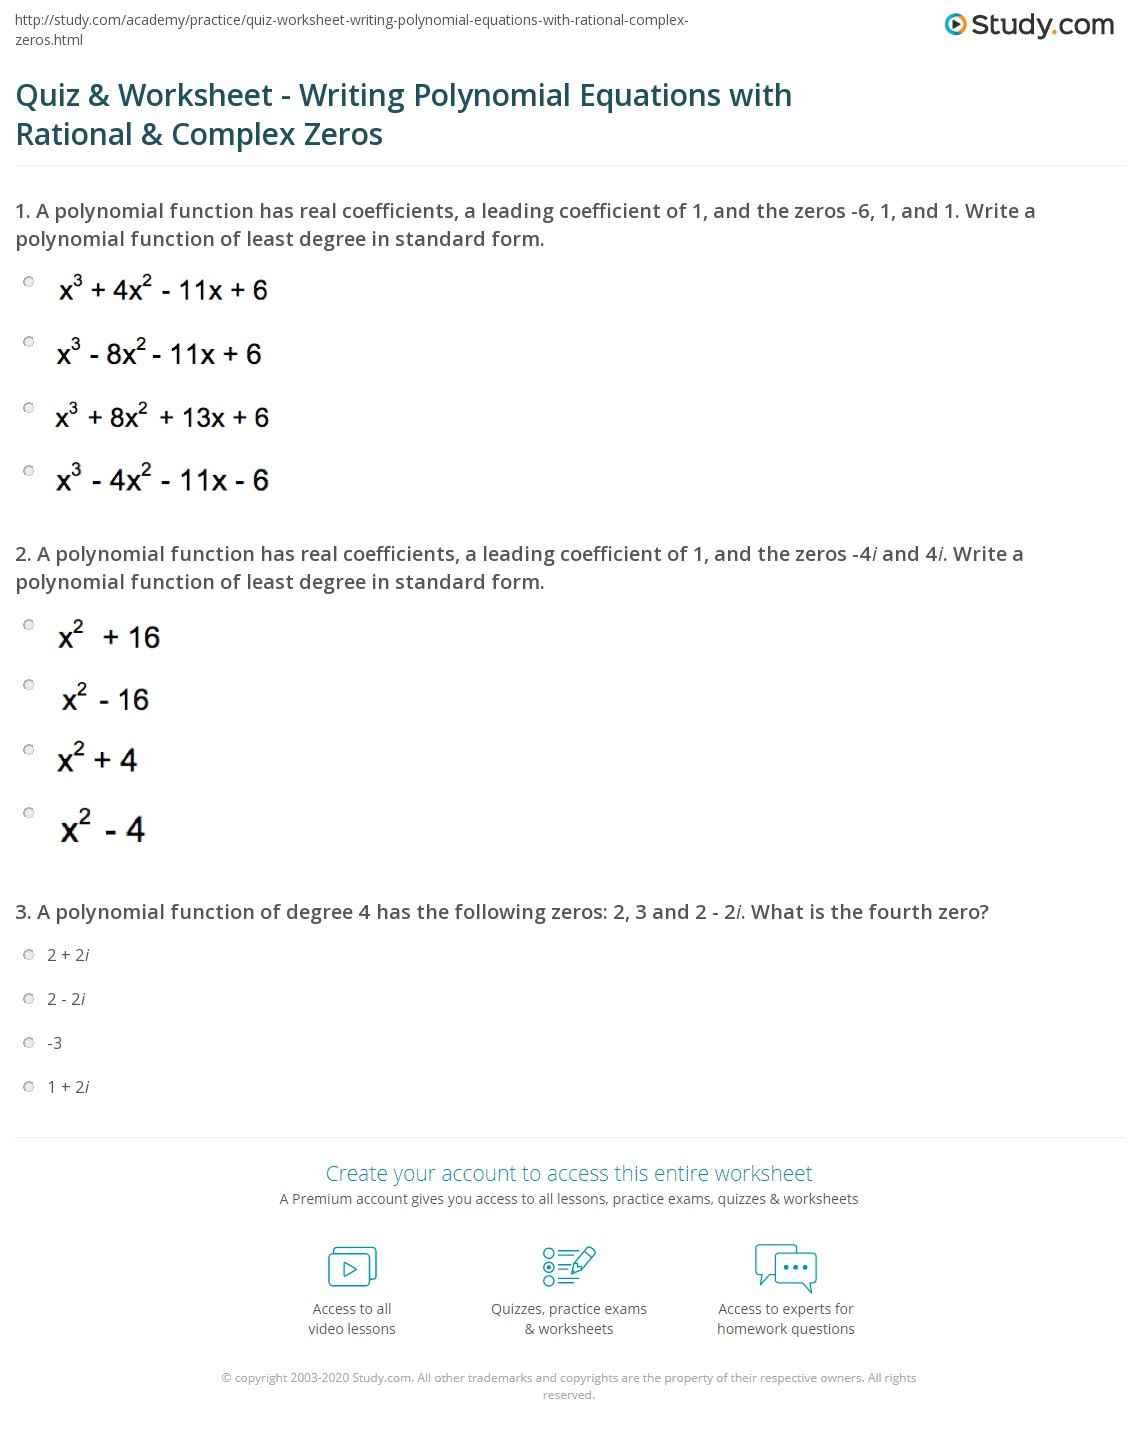 Solving Polynomial Equations Worksheet Answers Equation Help Homework Polynomial Equation Help Homework